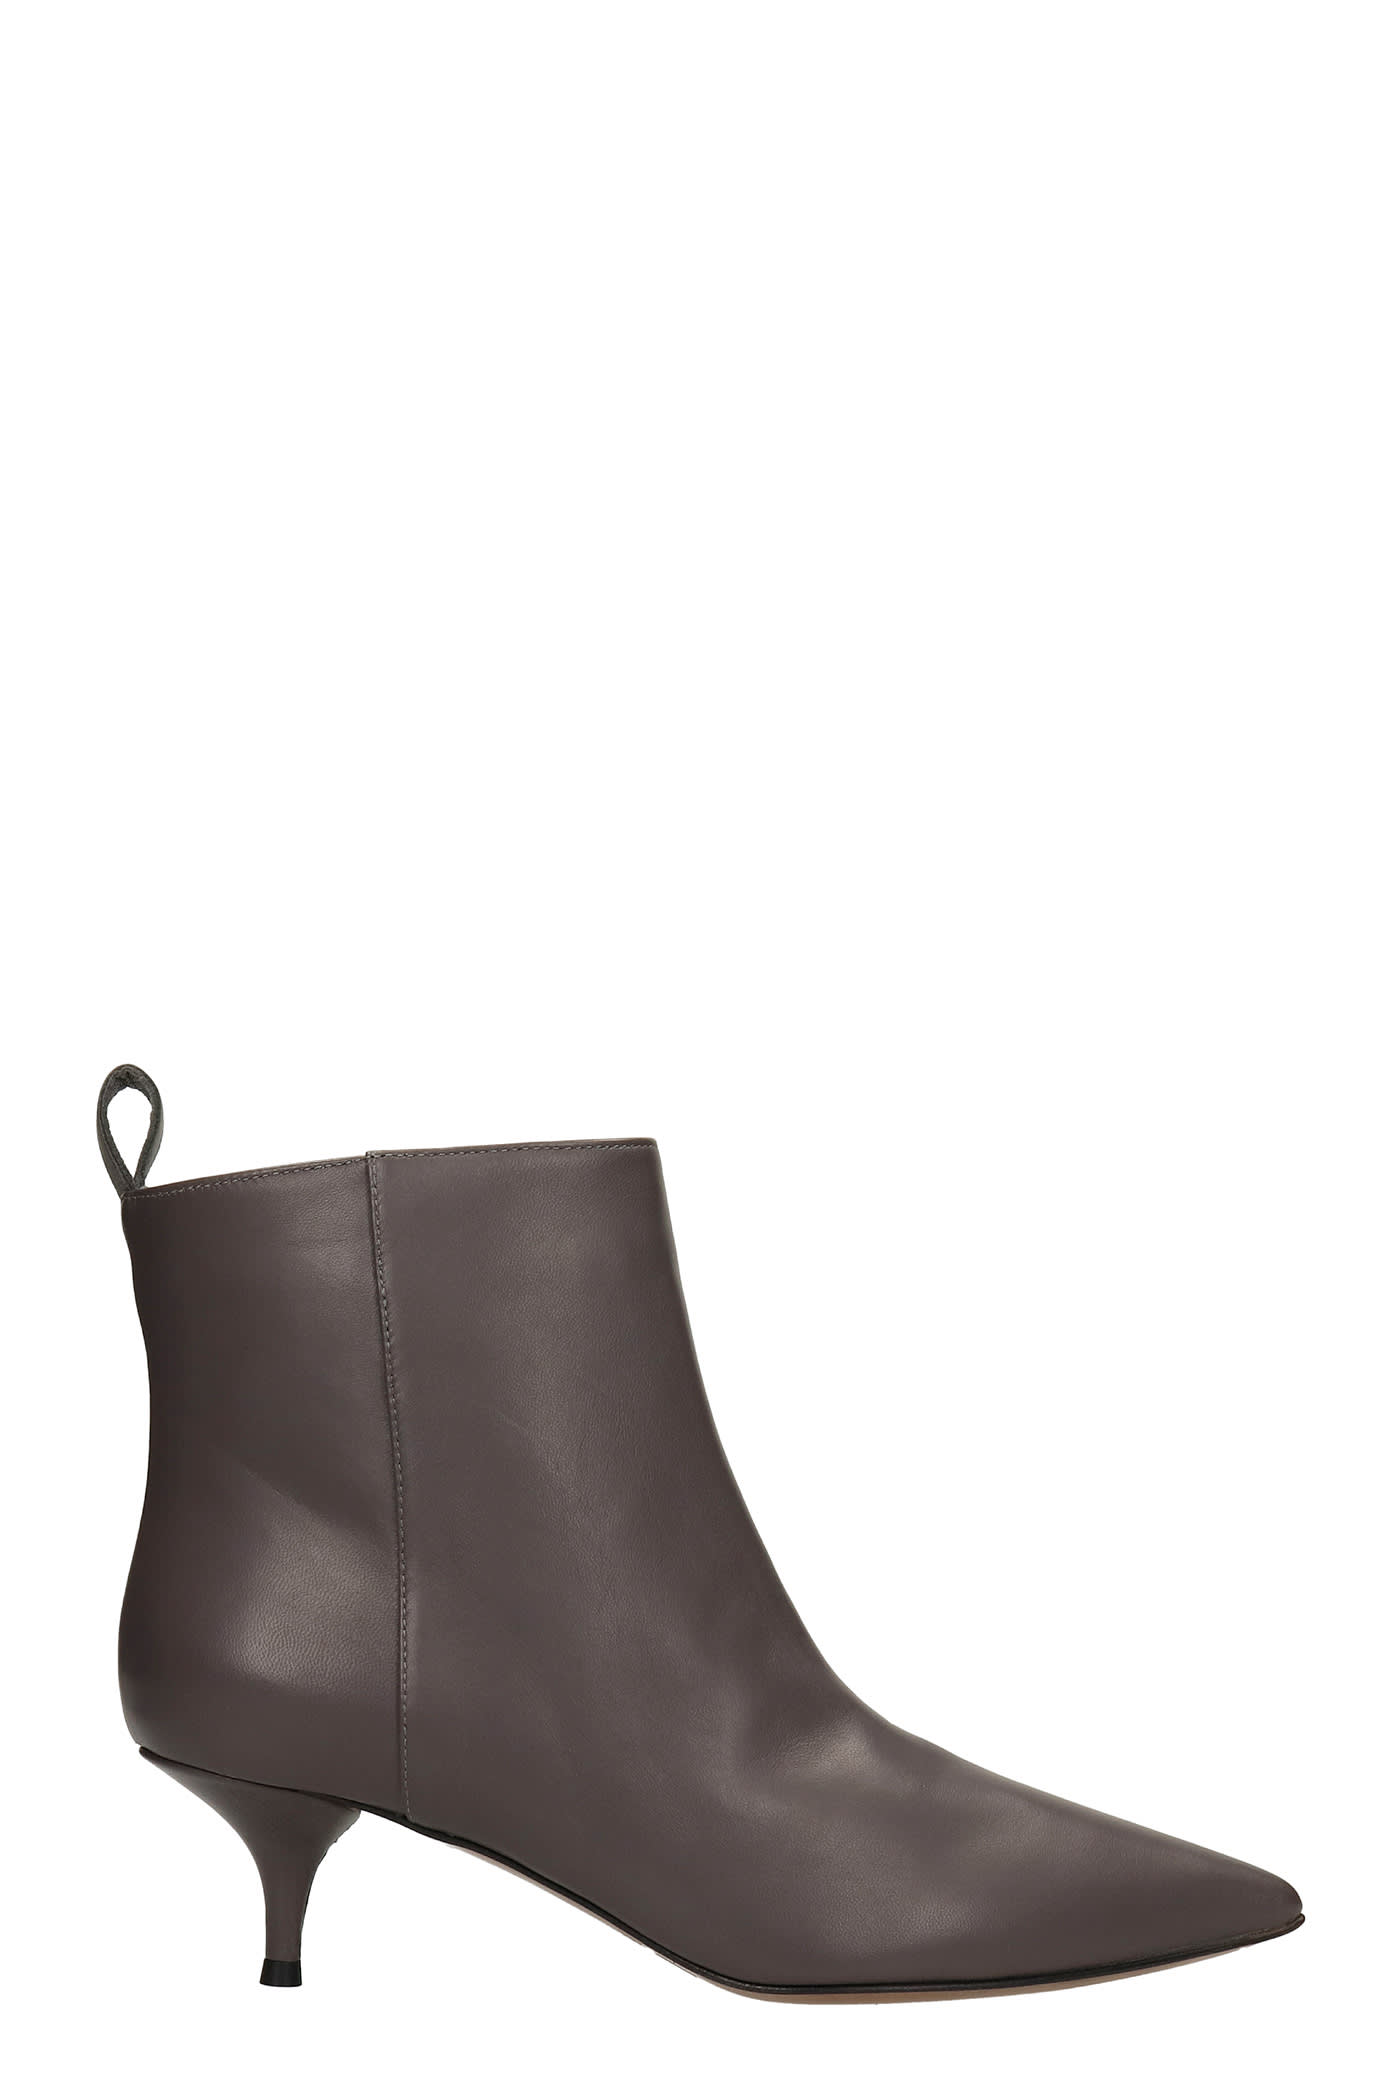 LAutre Chose Low Heels Ankle Boots In Grey Leather